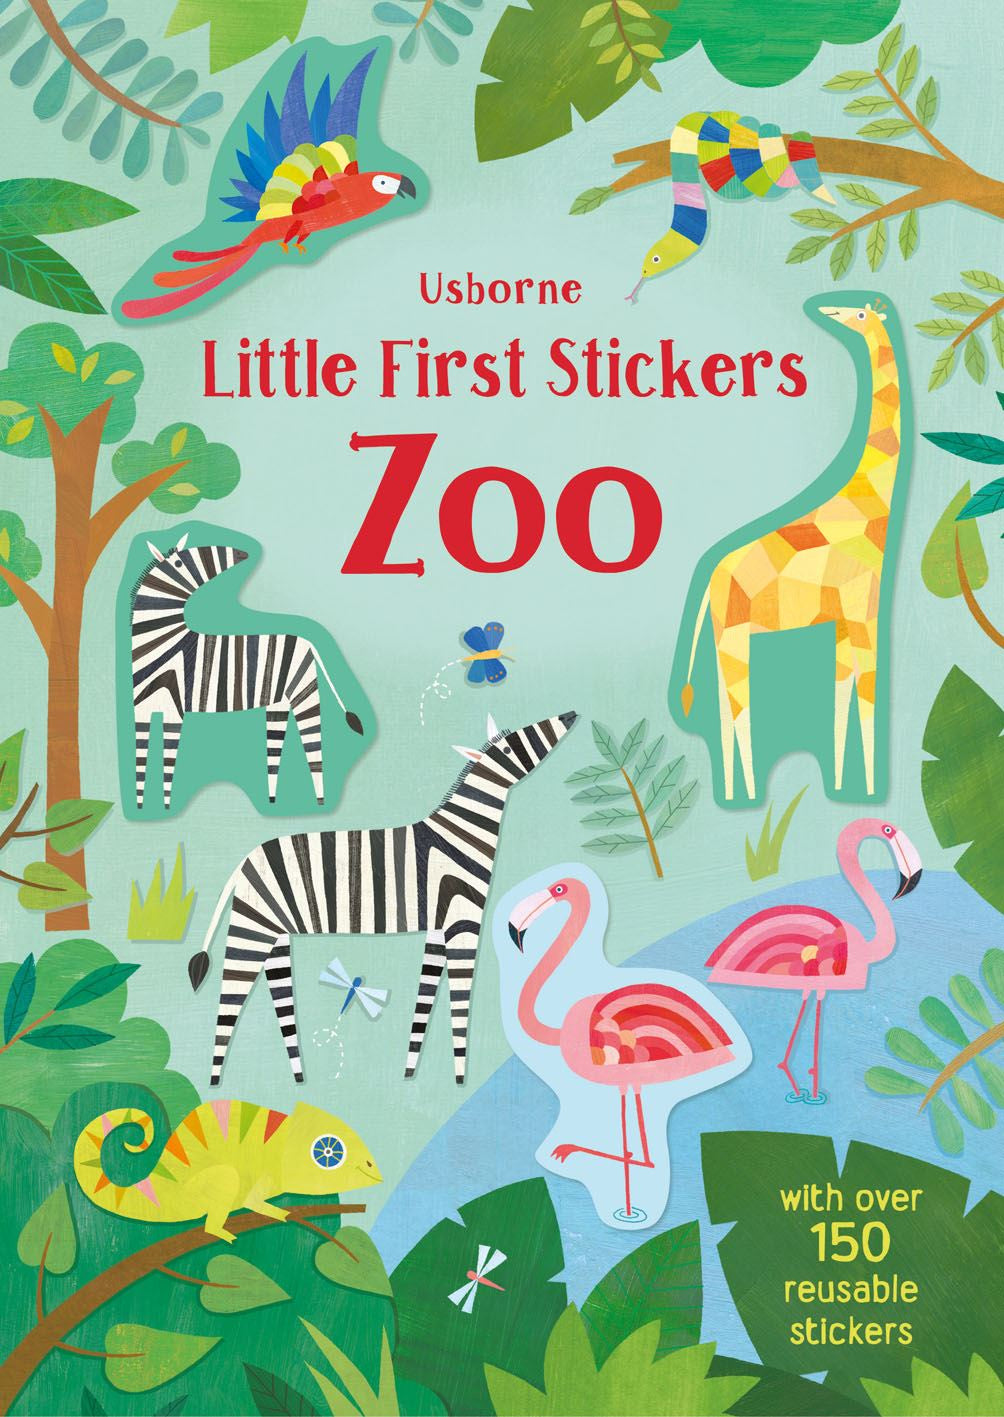 My first little stickers zoo